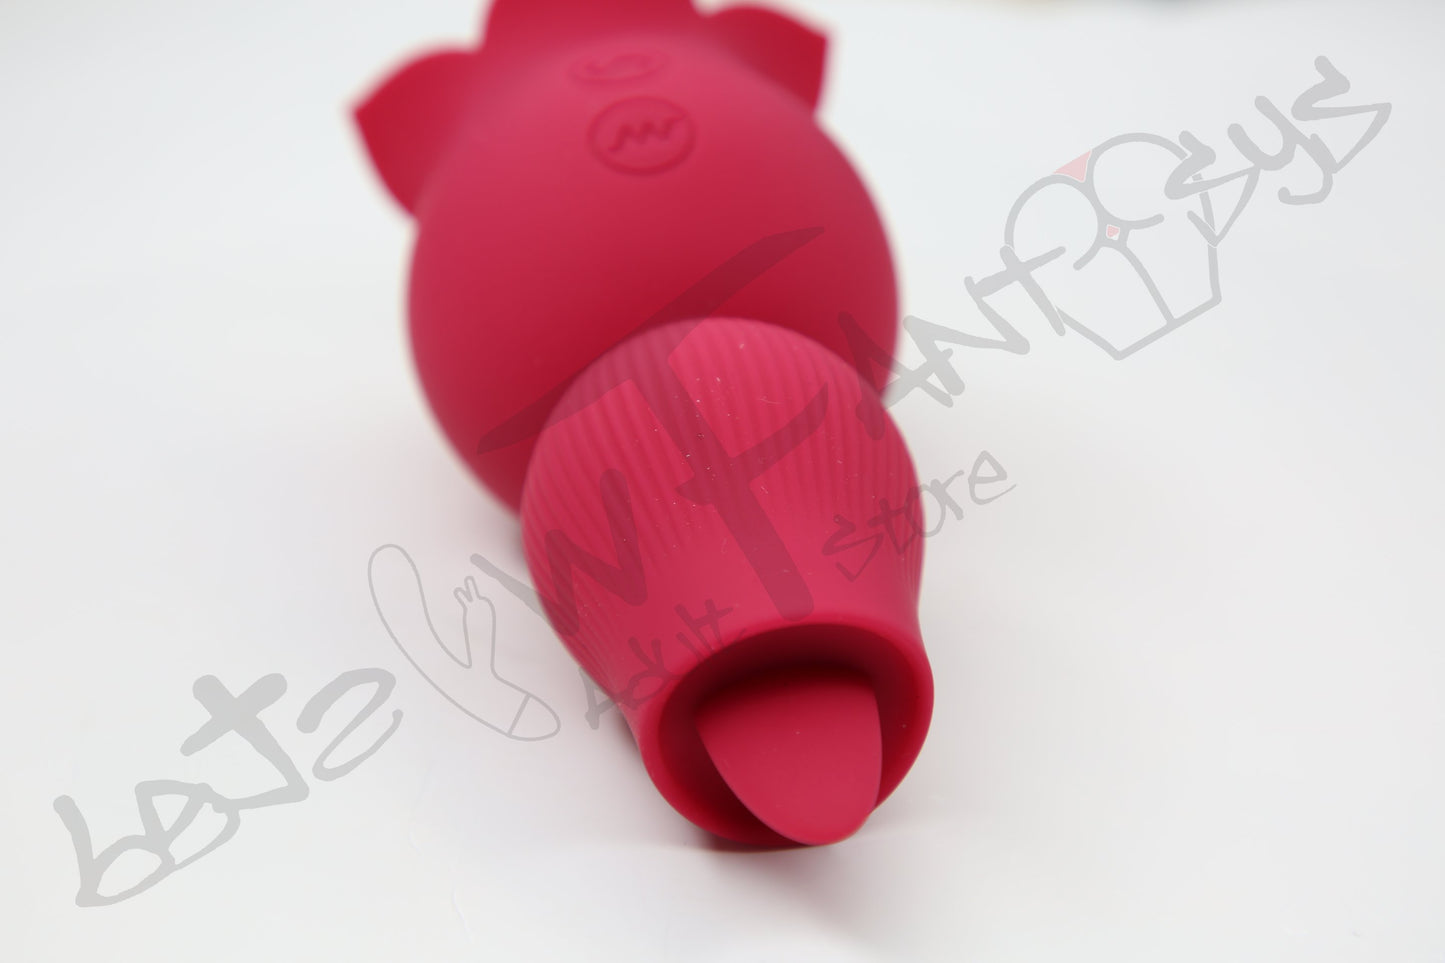 Adorable night rose 2 in 1 sucking and licking vibrator